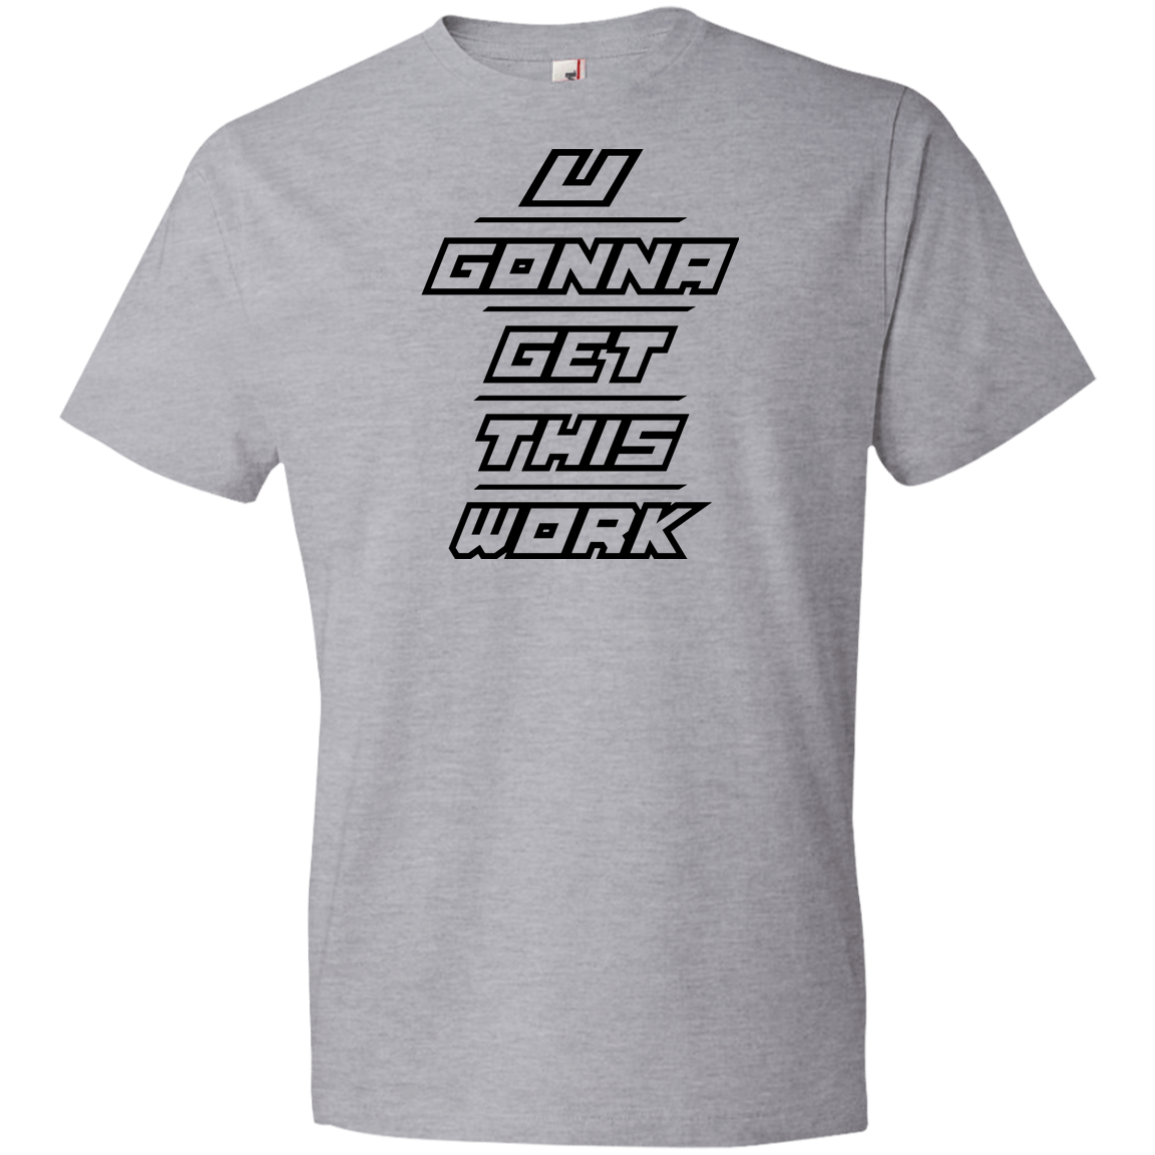 Get This Work Youth T-Shirt